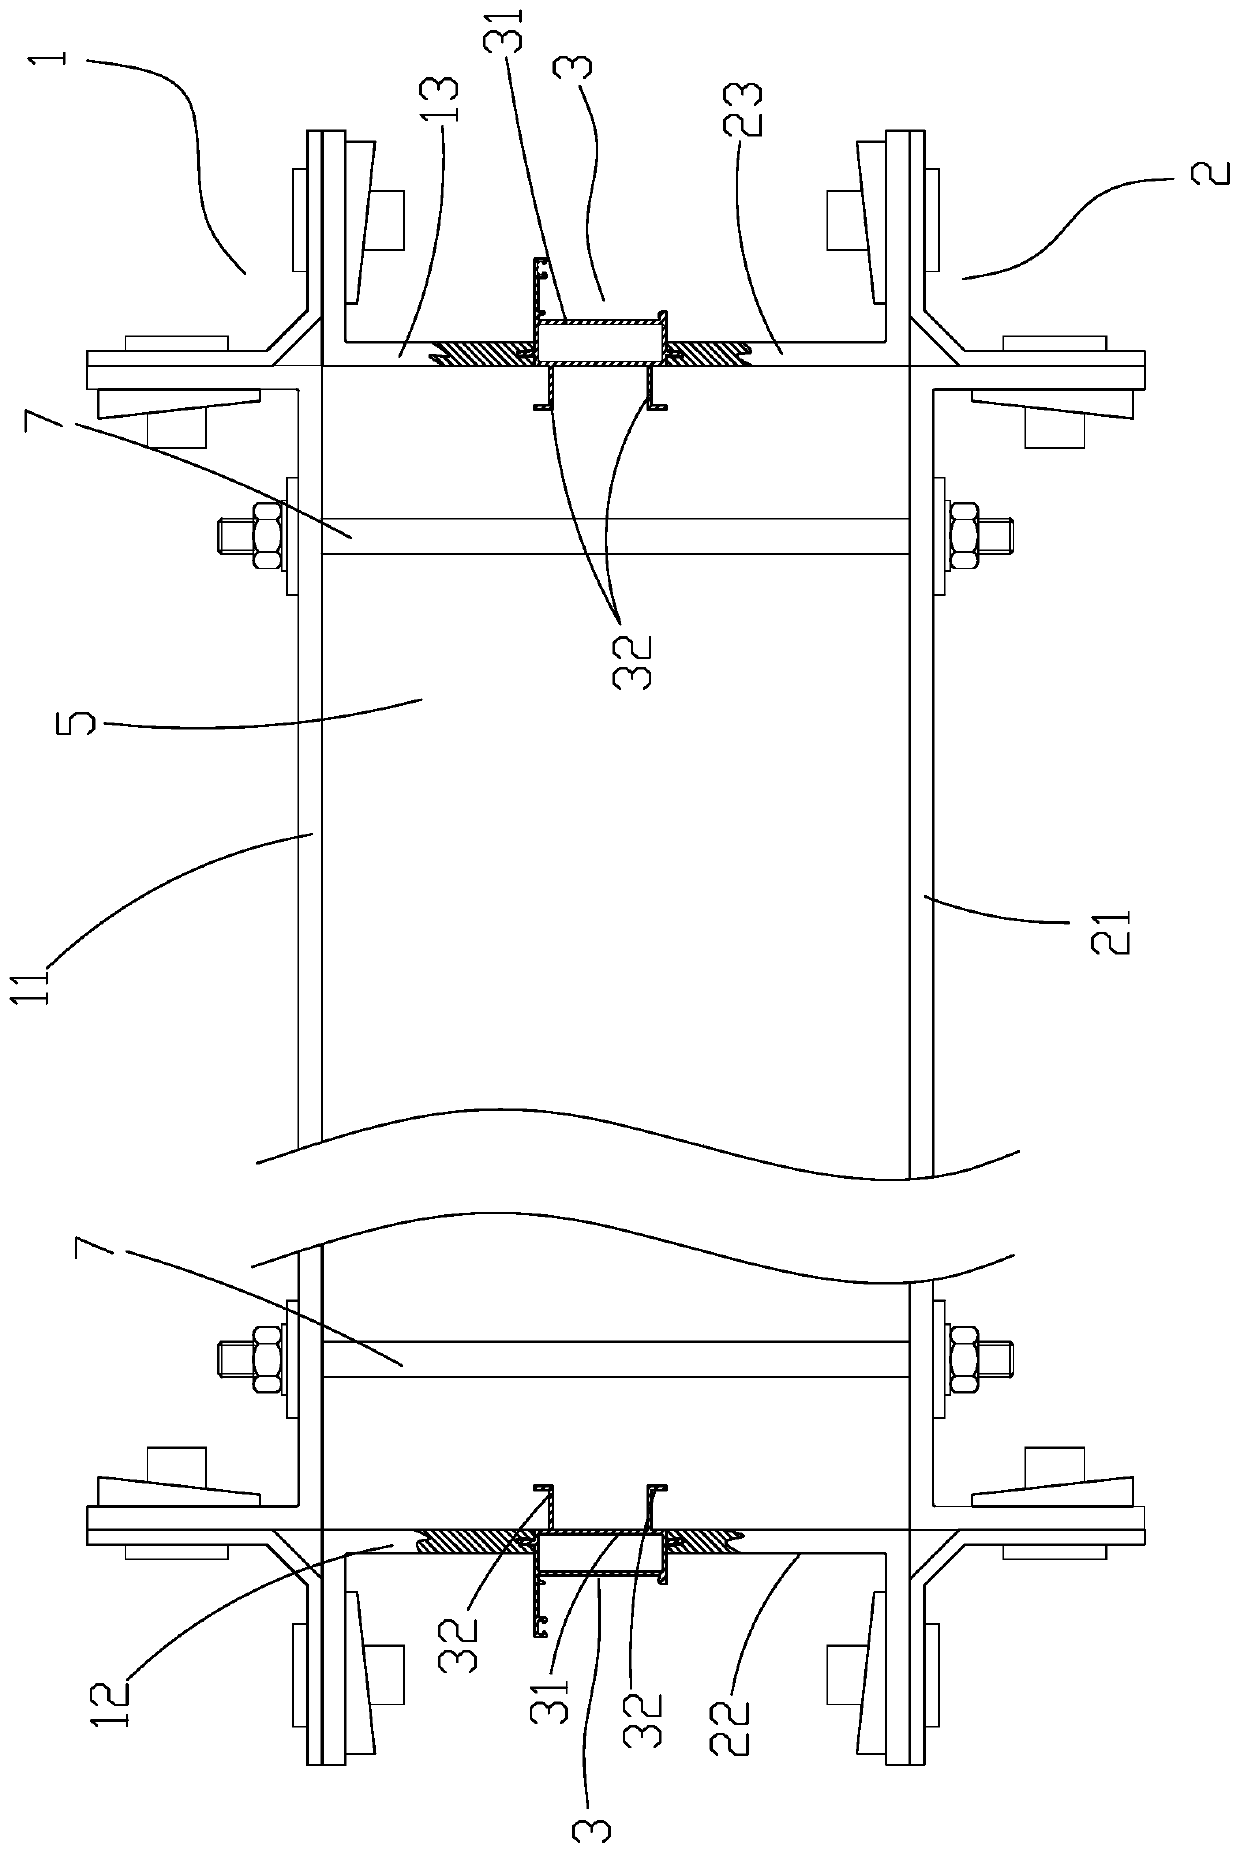 Building formwork assembly and aluminum alloy window frame installation method